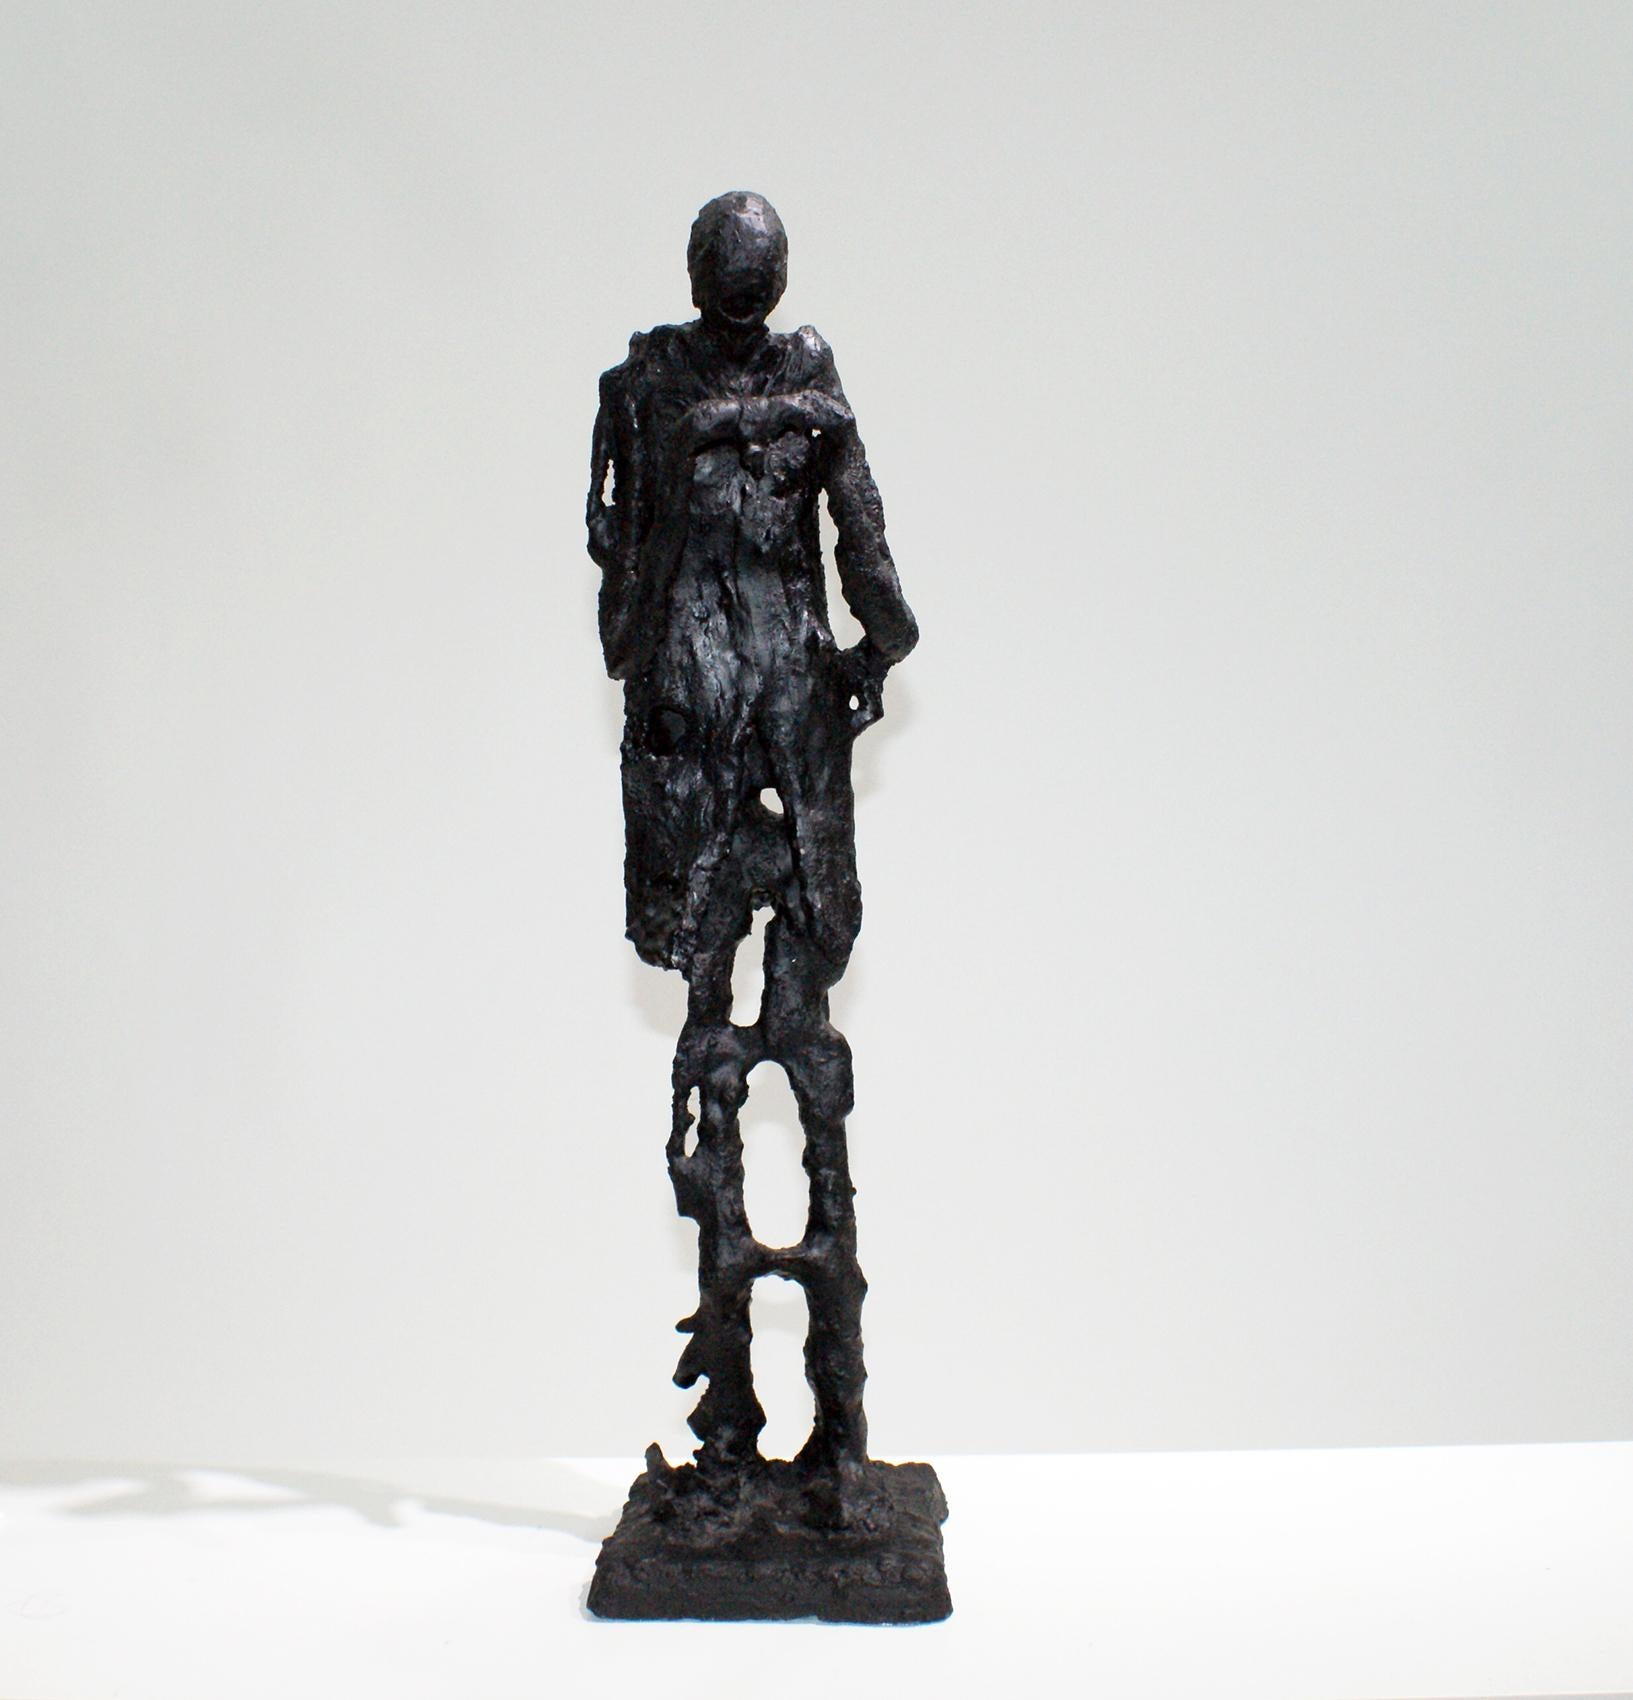 Sculpture by the Lebanese artist Antoine Berbery, consist of black plaster personalizing a standing man in black color.
Antoine Berbery is a well-known contemporary Lebanese sculptor since 1970, his sculptures are exposed in the presidential palace